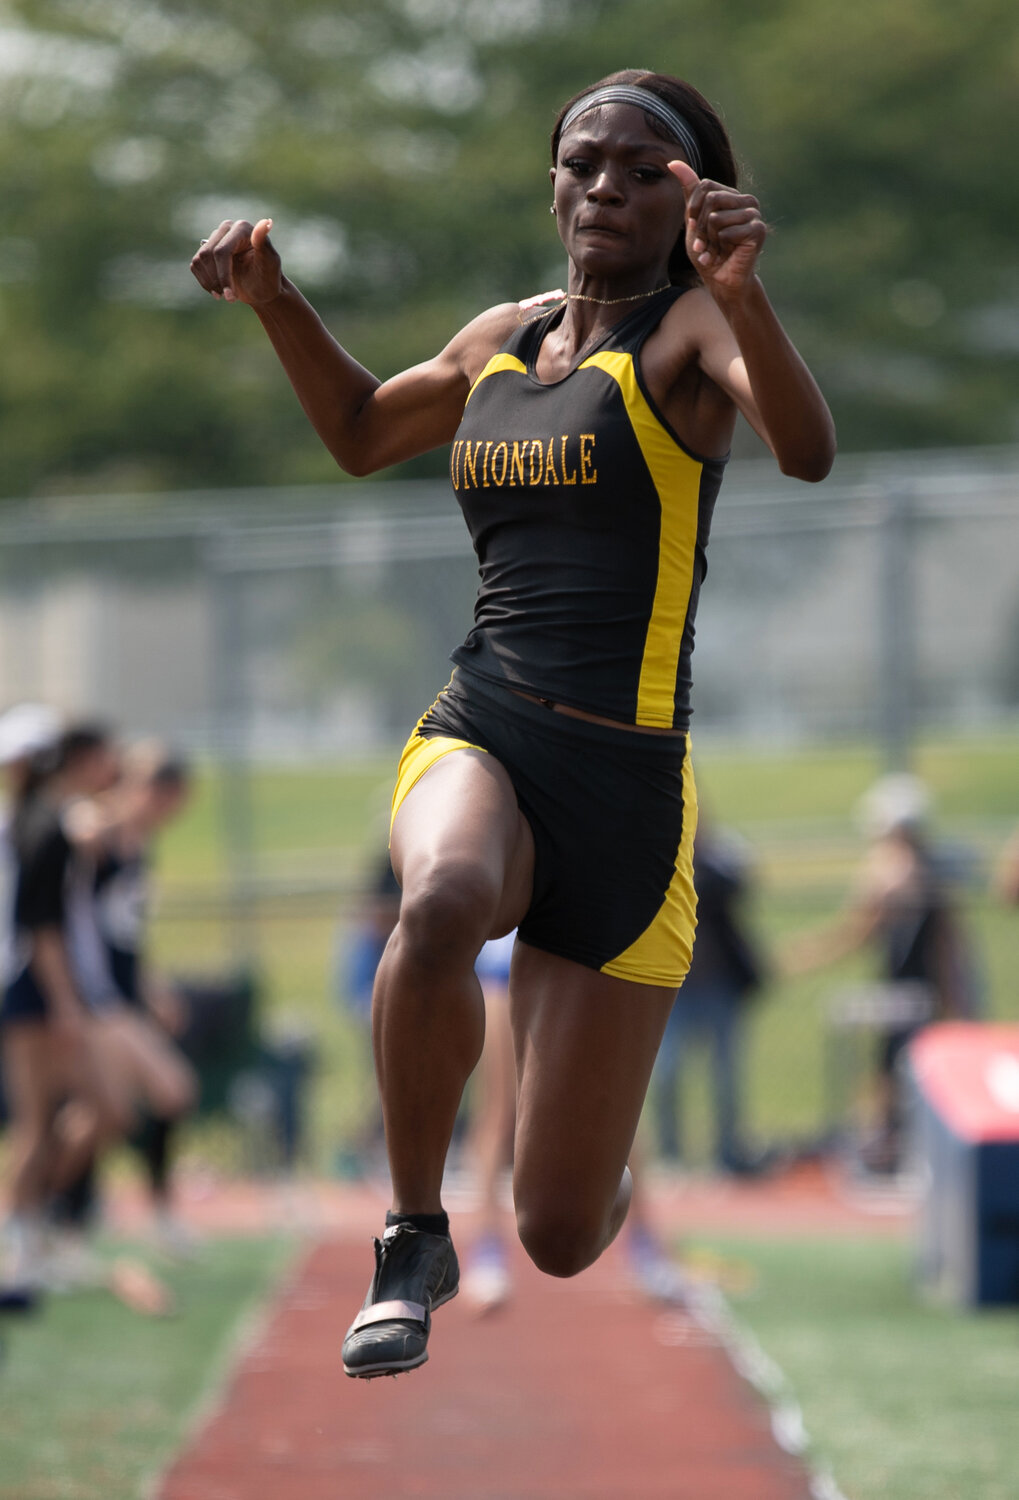 Senior Aniyah Jackson earned All-County honors in the long jump and helped the Knights to a fourth-place finish in Class AAA.